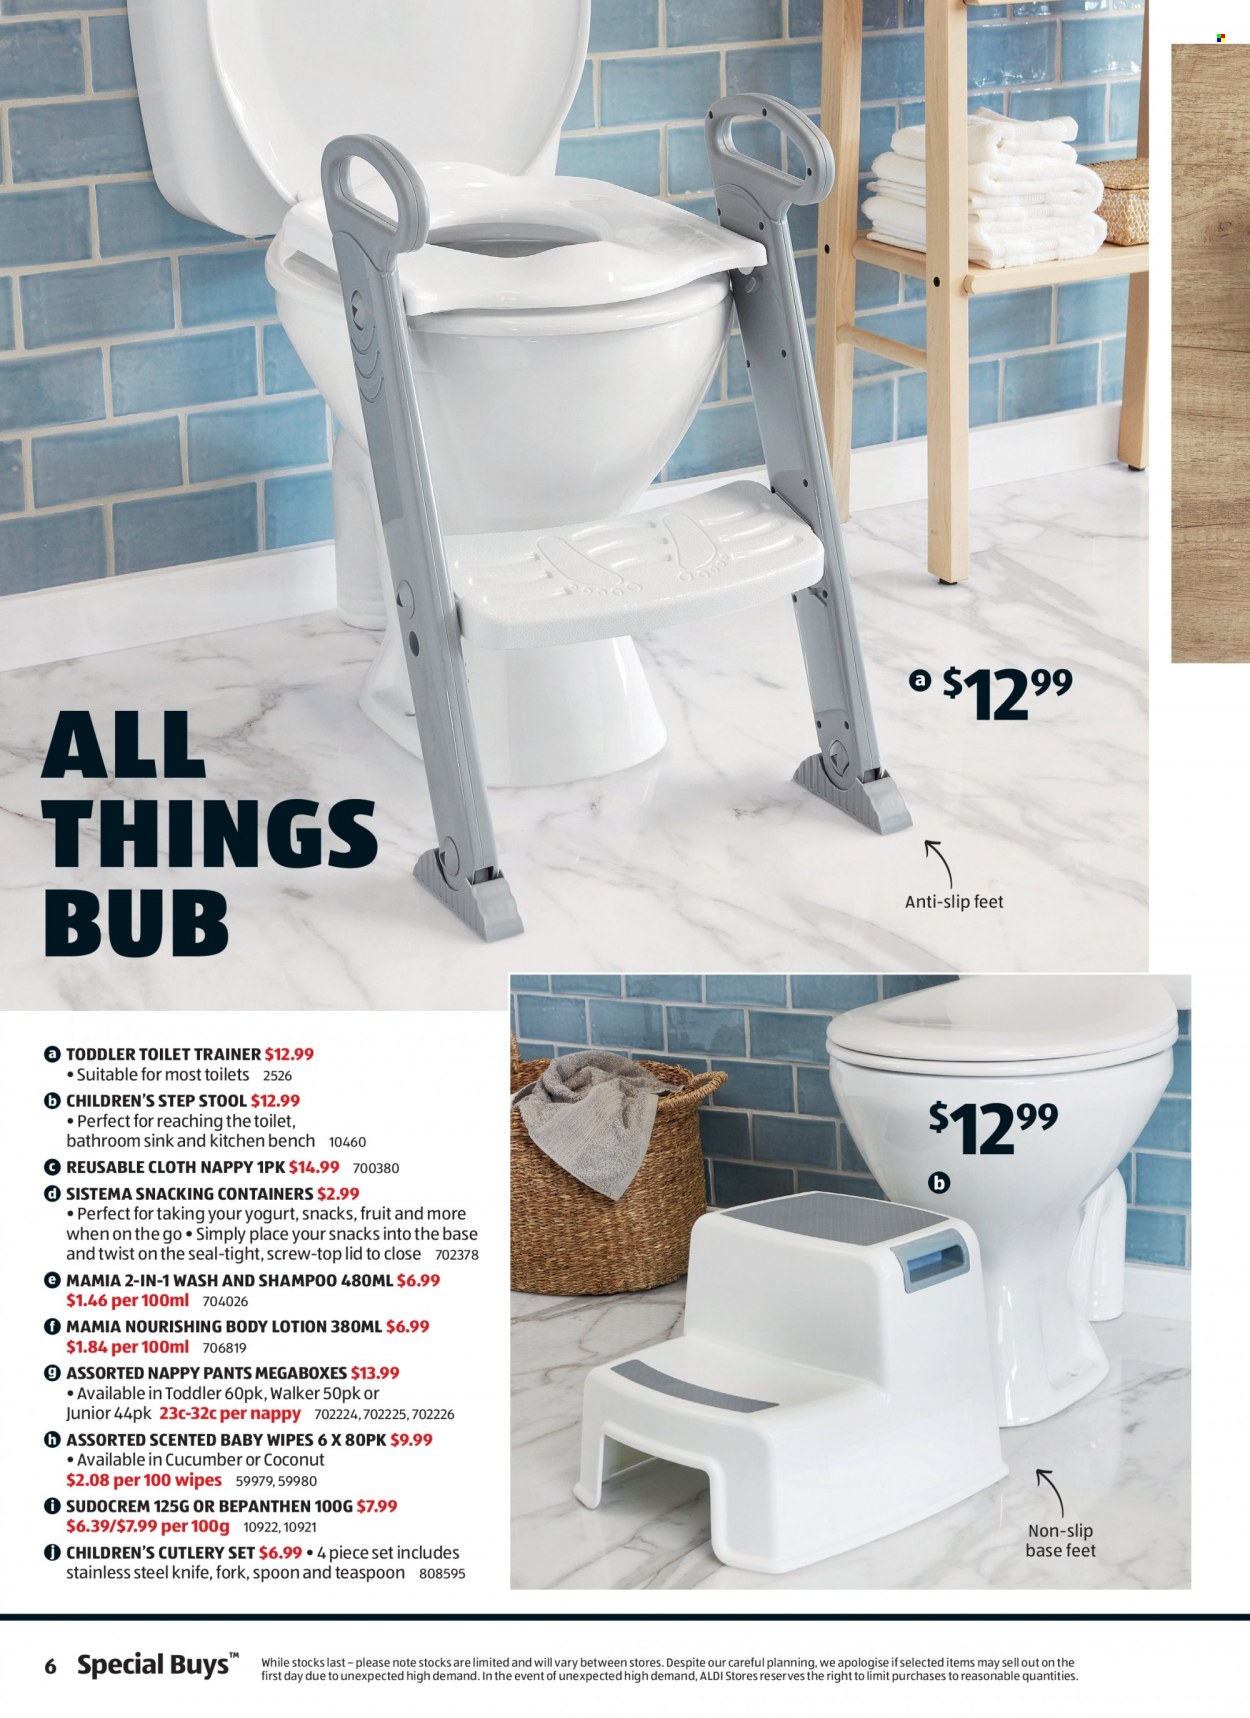 thumbnail - ALDI Catalogue - 13 Oct 2021 - 19 Oct 2021 - Sales products - yoghurt, snack, wipes, pants, baby wipes, nappies, shampoo, body lotion, fork, knife, lid, spoon, cutlery set, teaspoon, bench, Sudocrem. Page 6.